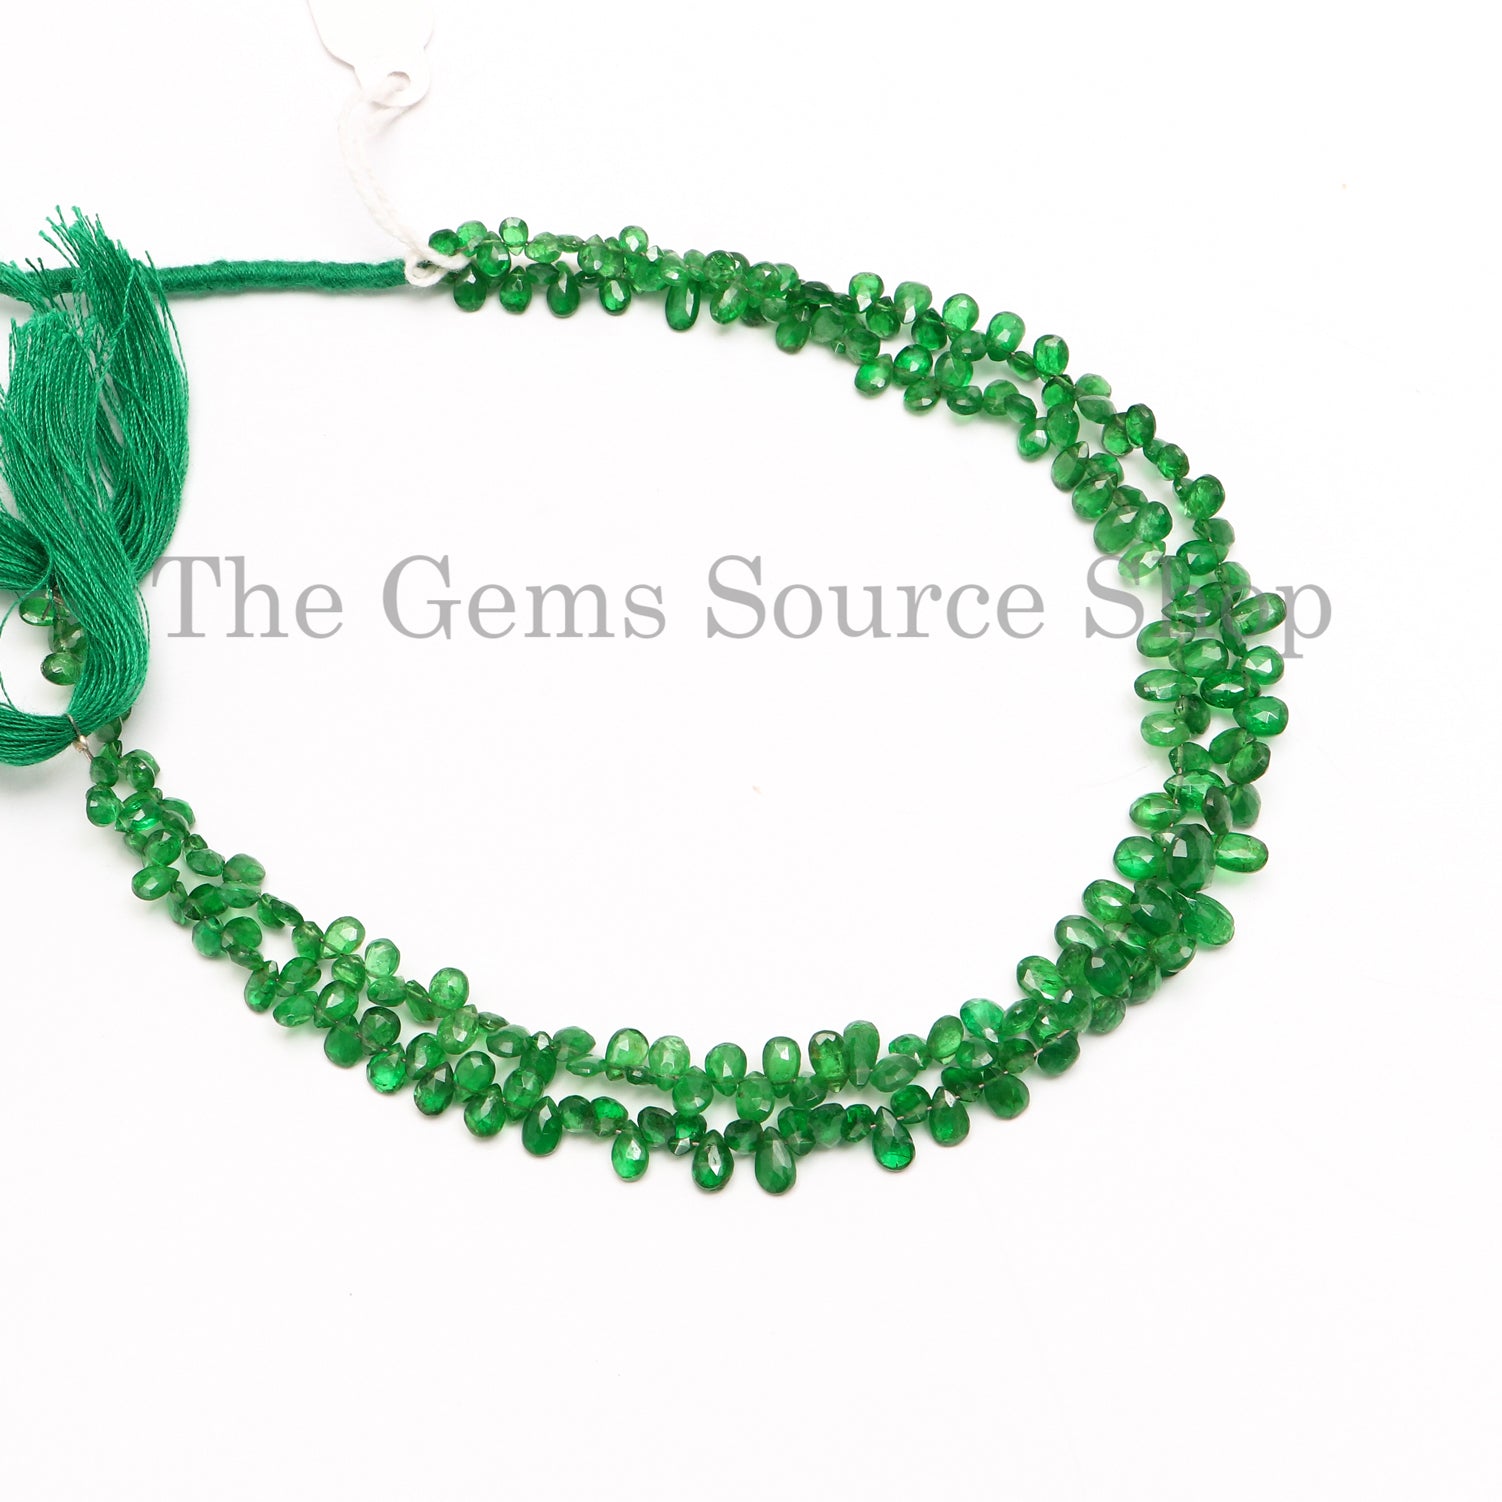 Top Quality Tsavorite Faceted Pear Shape Beads